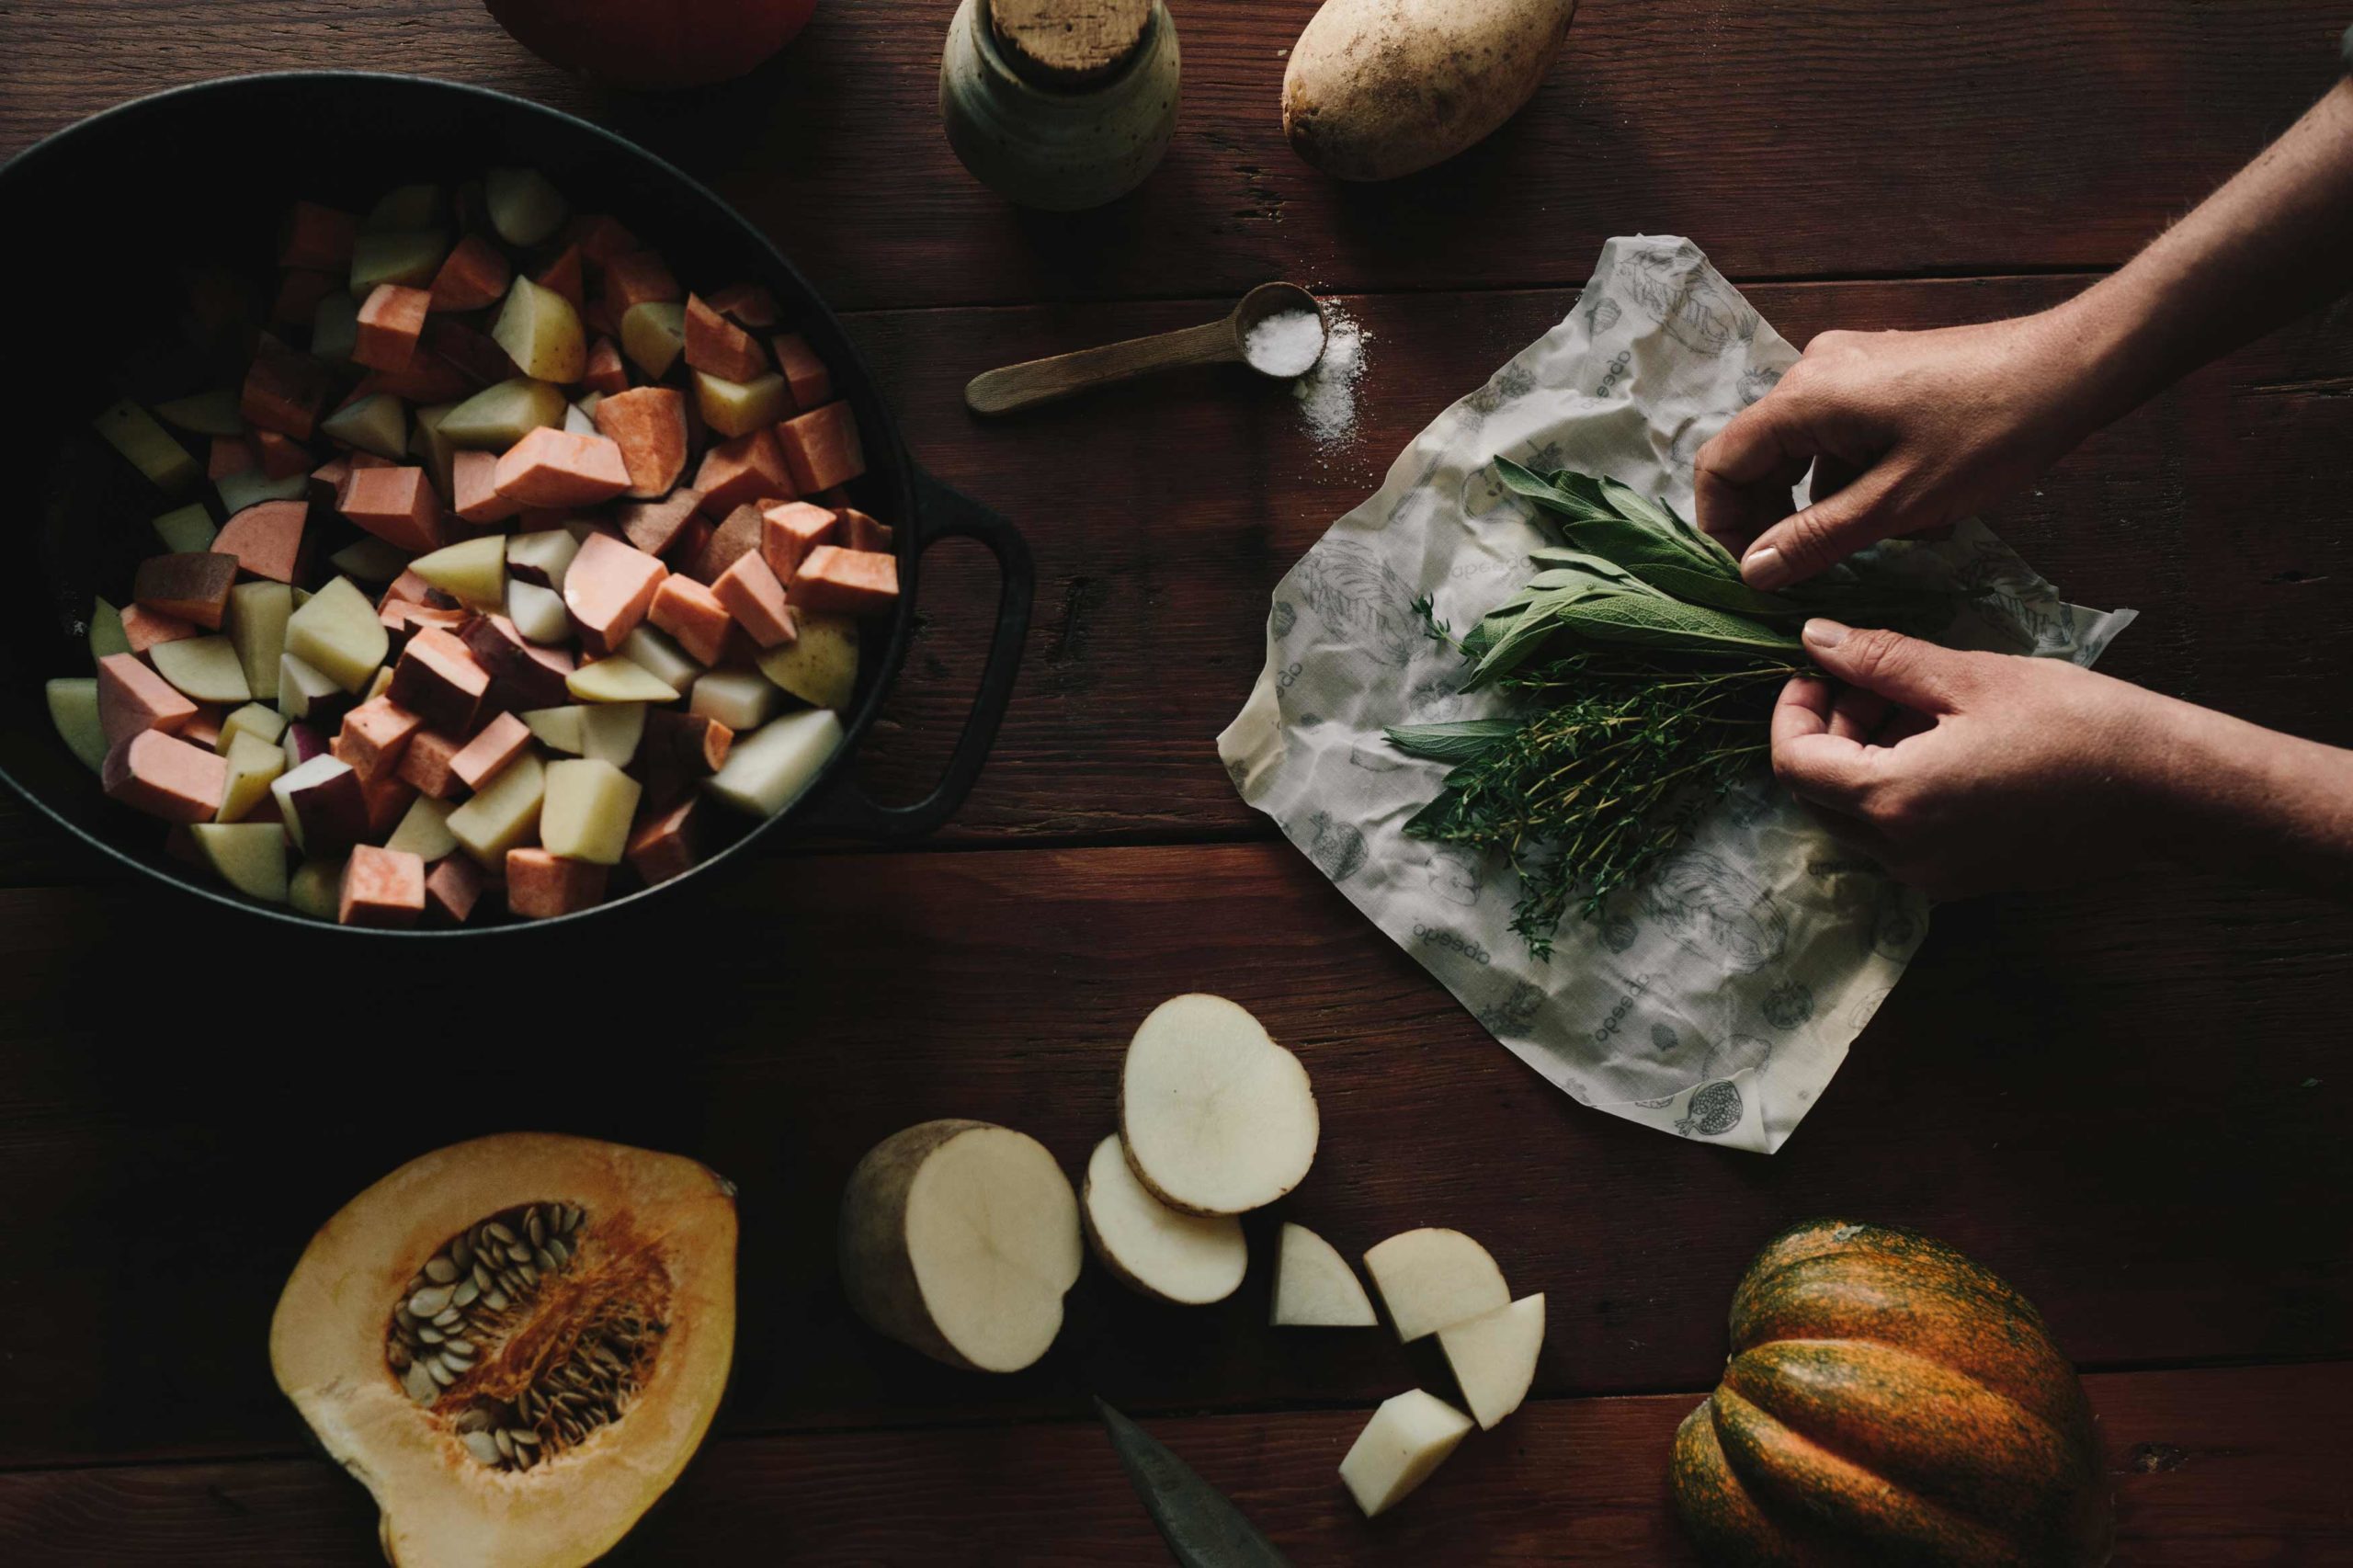 Overhead shot of a wooden table with a large cast iron pot with cut up root vegetables, half a squash, and sliced potatoes. There is an open package of Abeego wax food wrap containing herbs